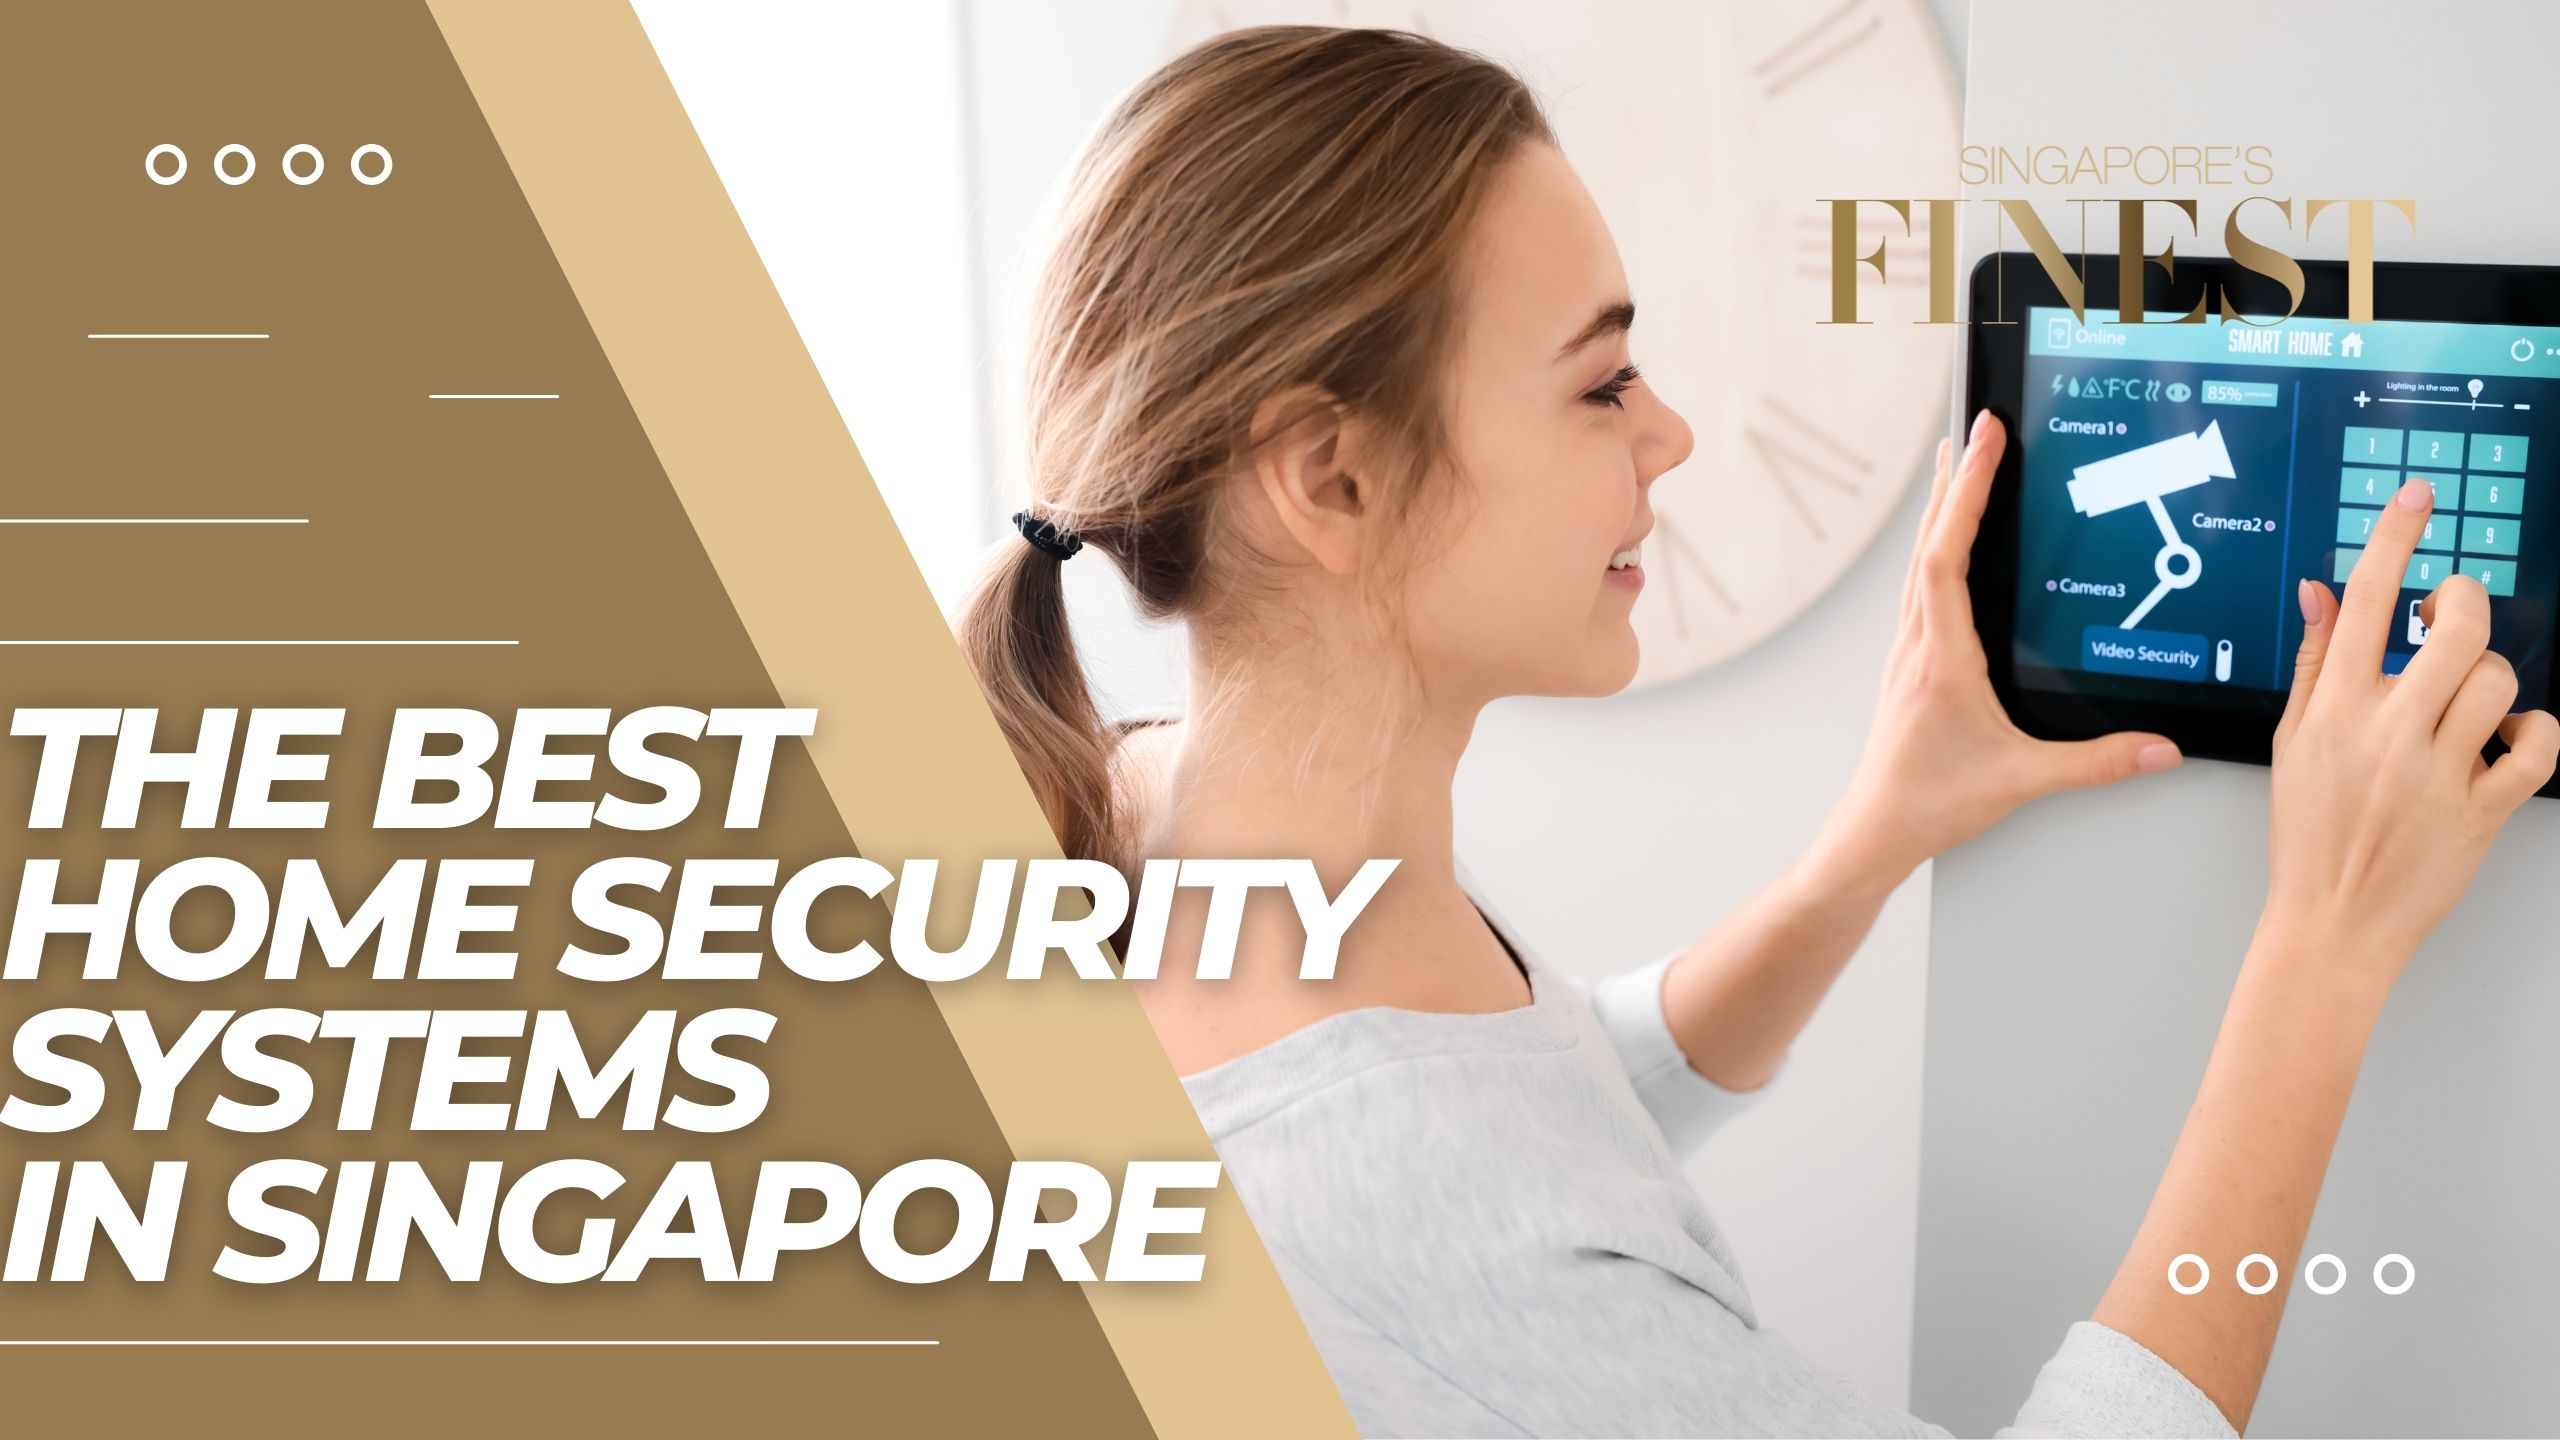 The Finest Home Security Systems in Singapore